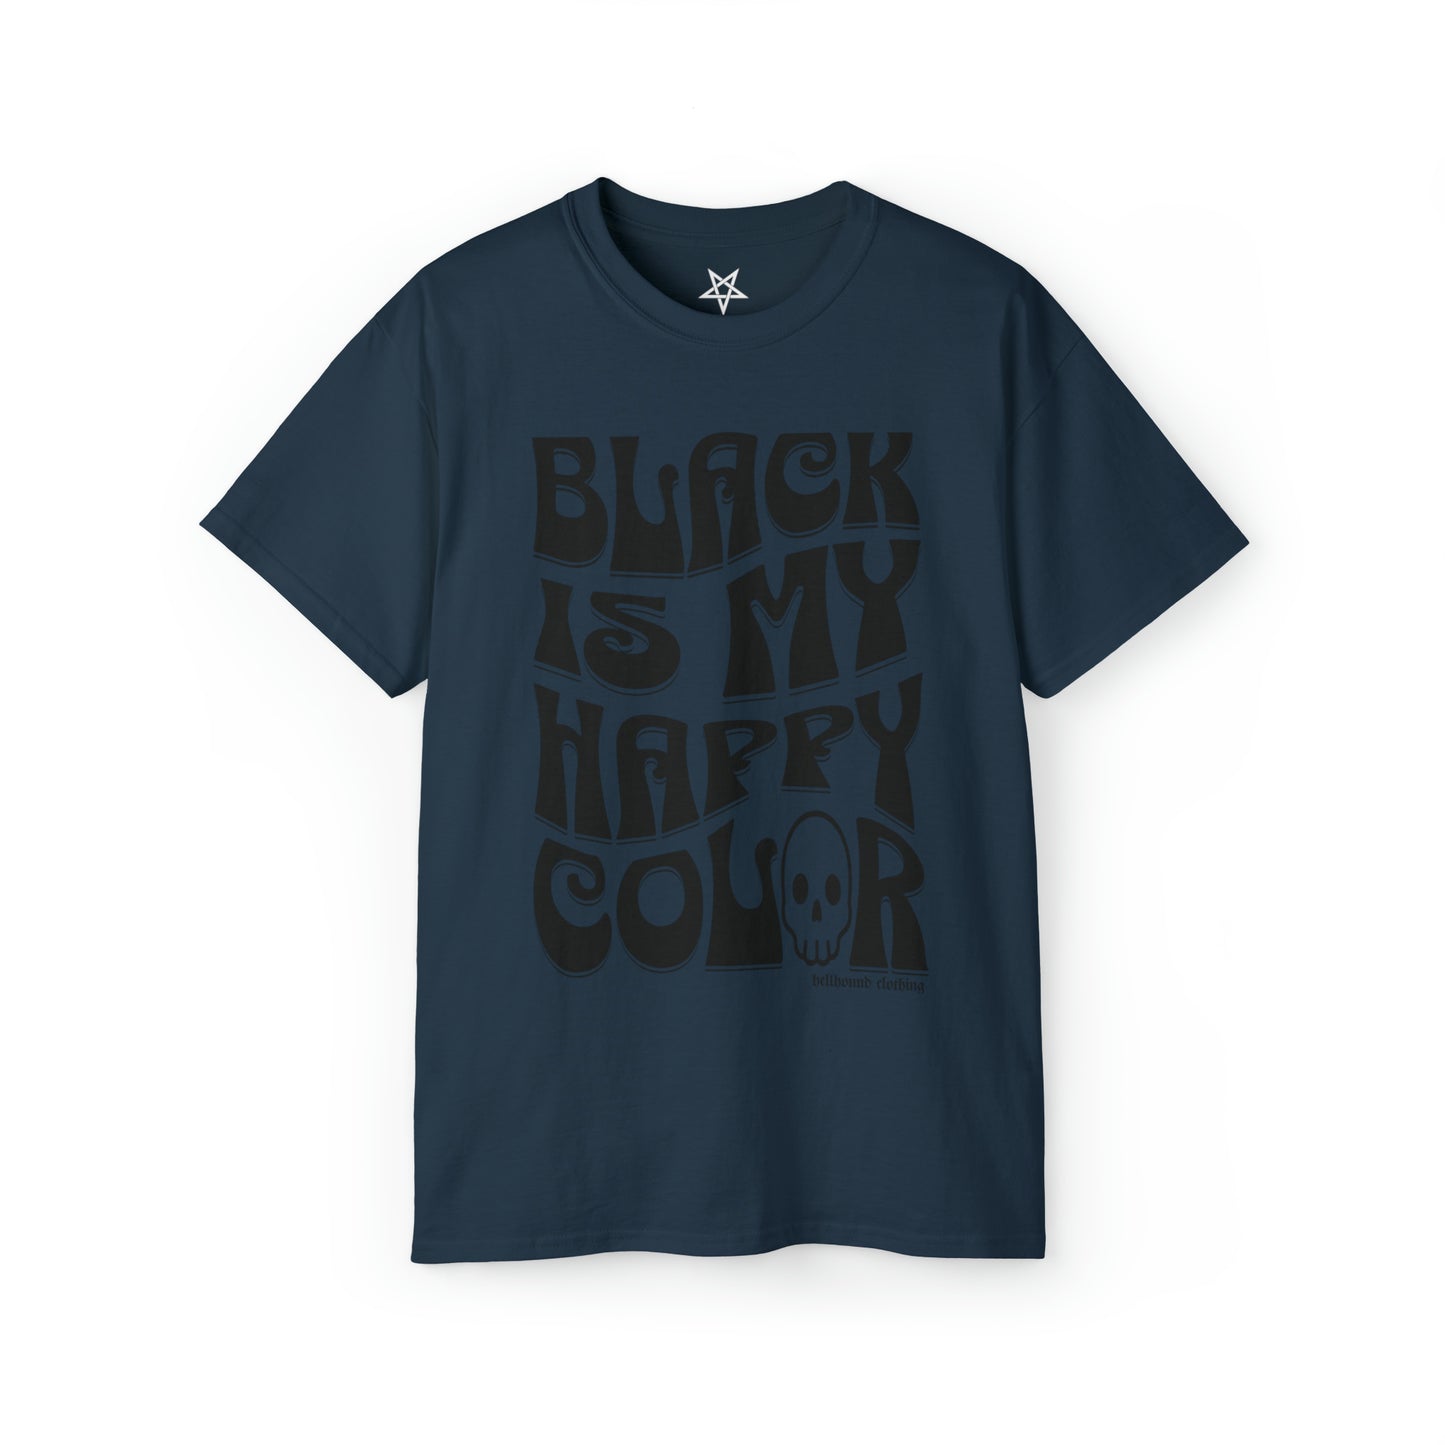 Black Is My Happy Color Retro Gothic T-shirt by Hellhound Clothing